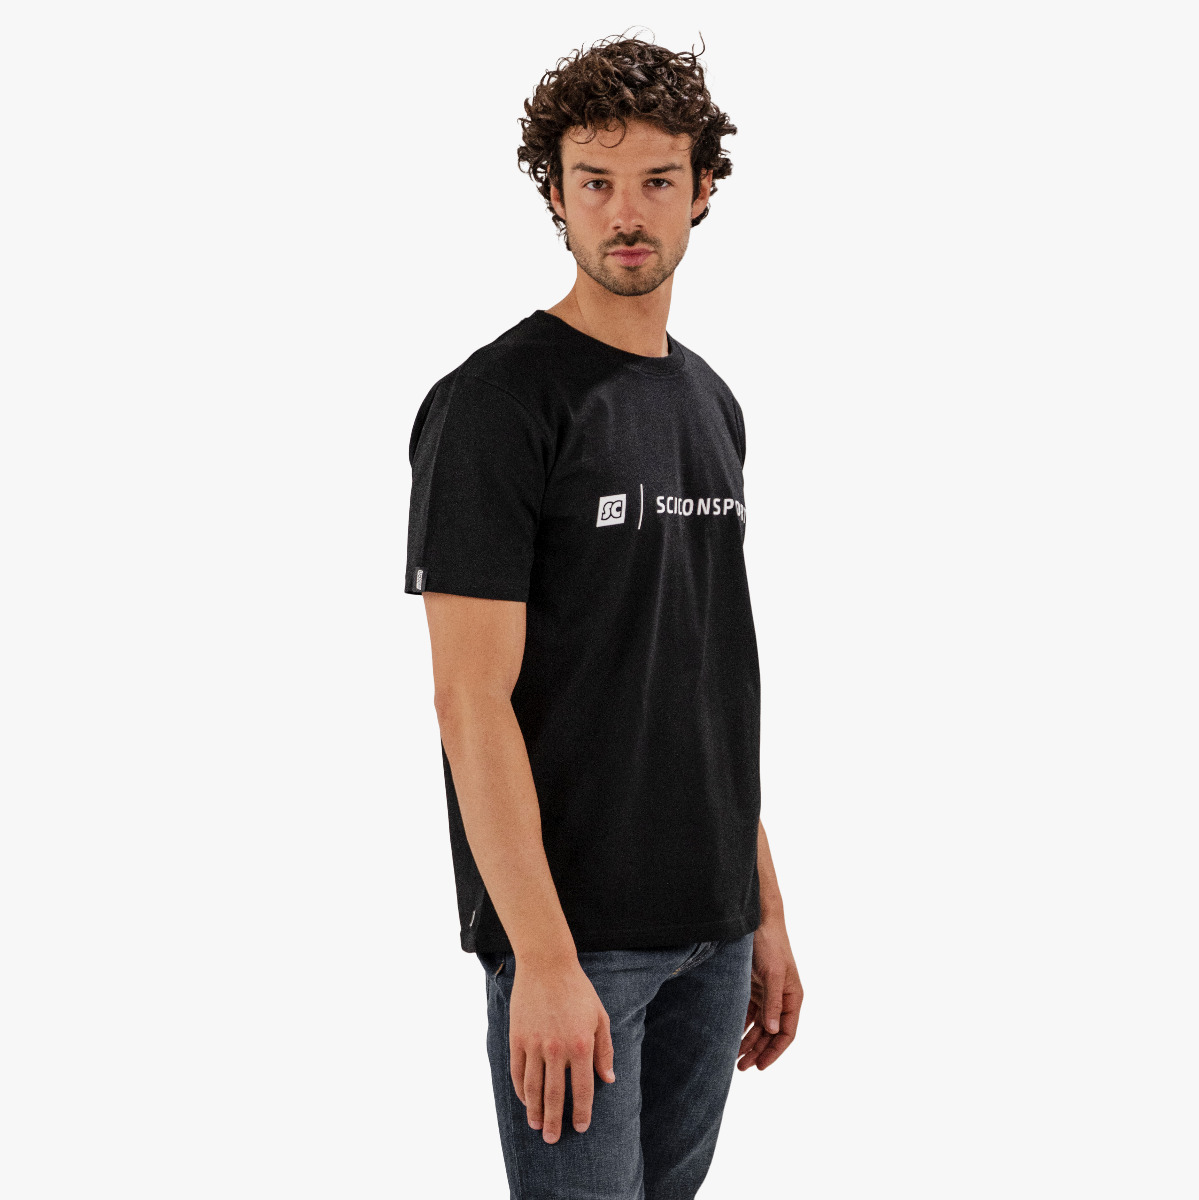 TEE SHIRT SCICONSPORTS